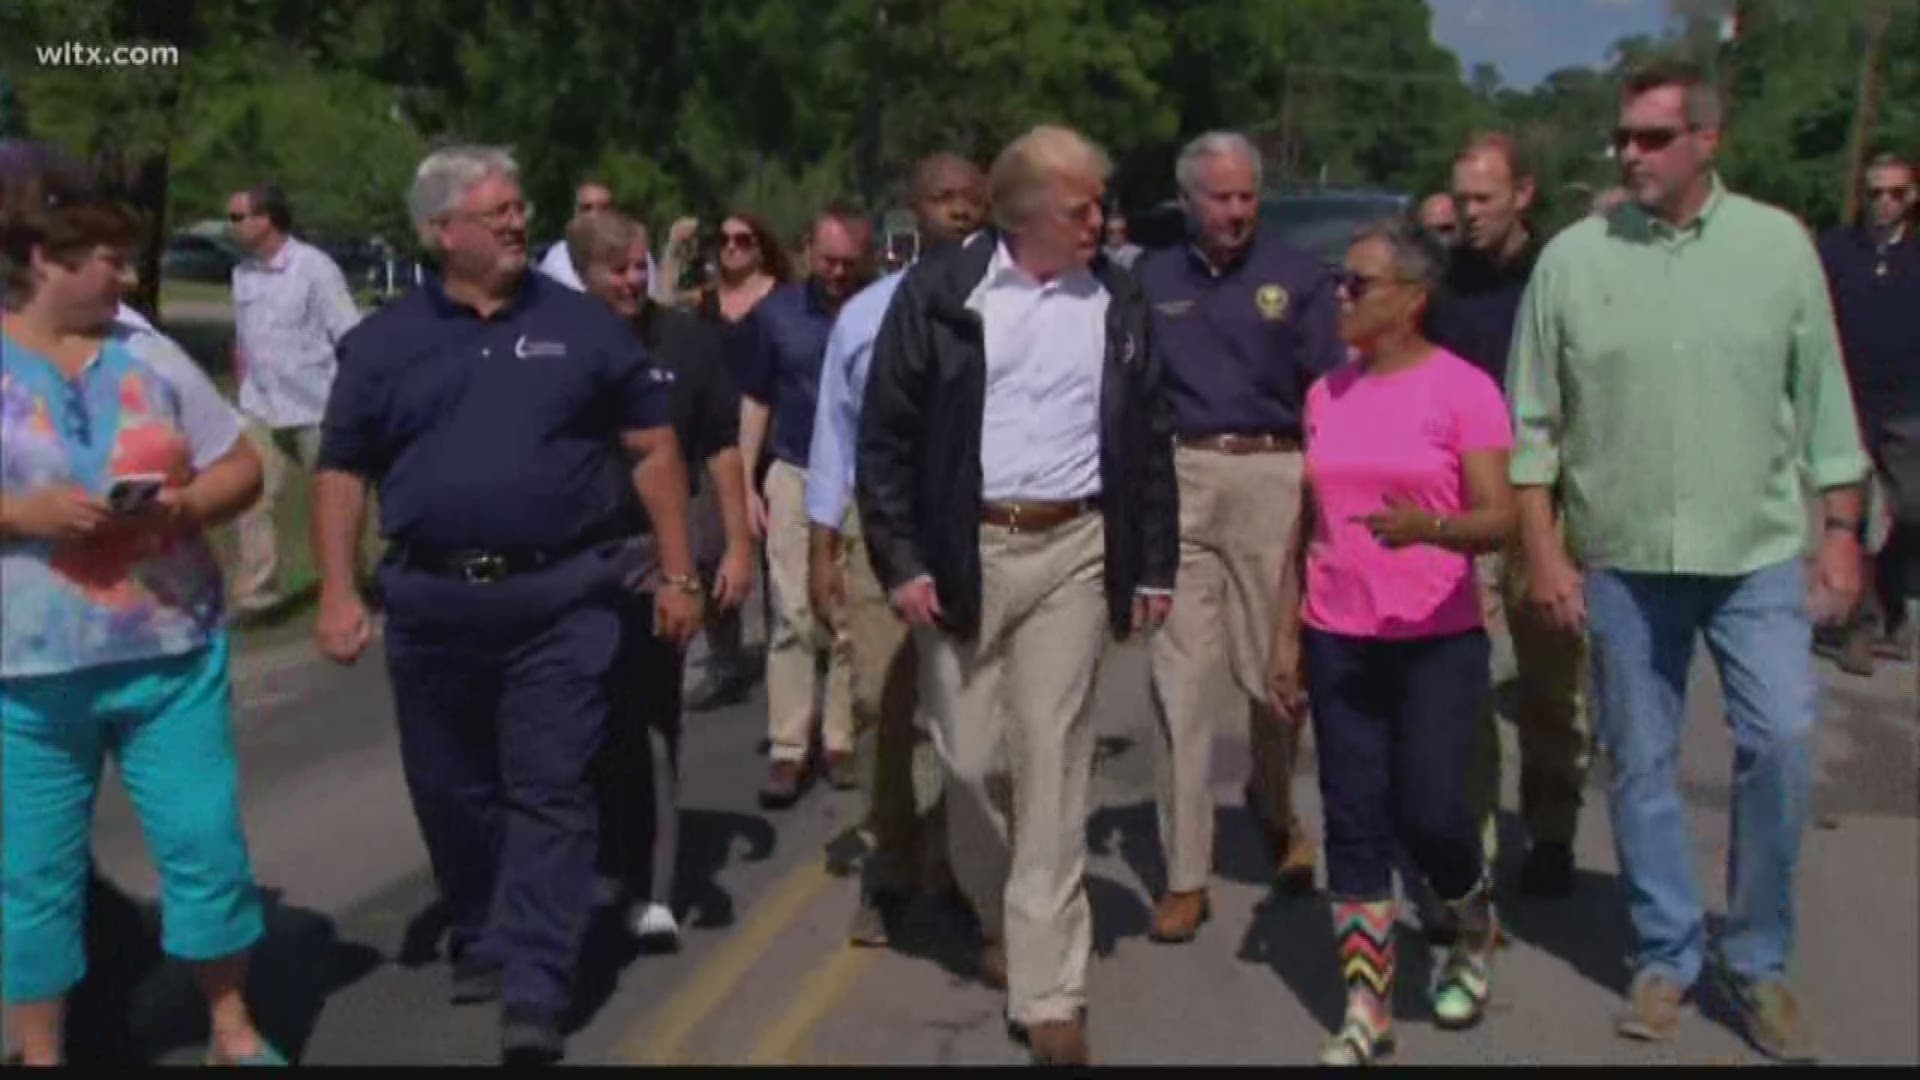 The President talks about flooding in South Carolina and the impact of Hurricane Florence